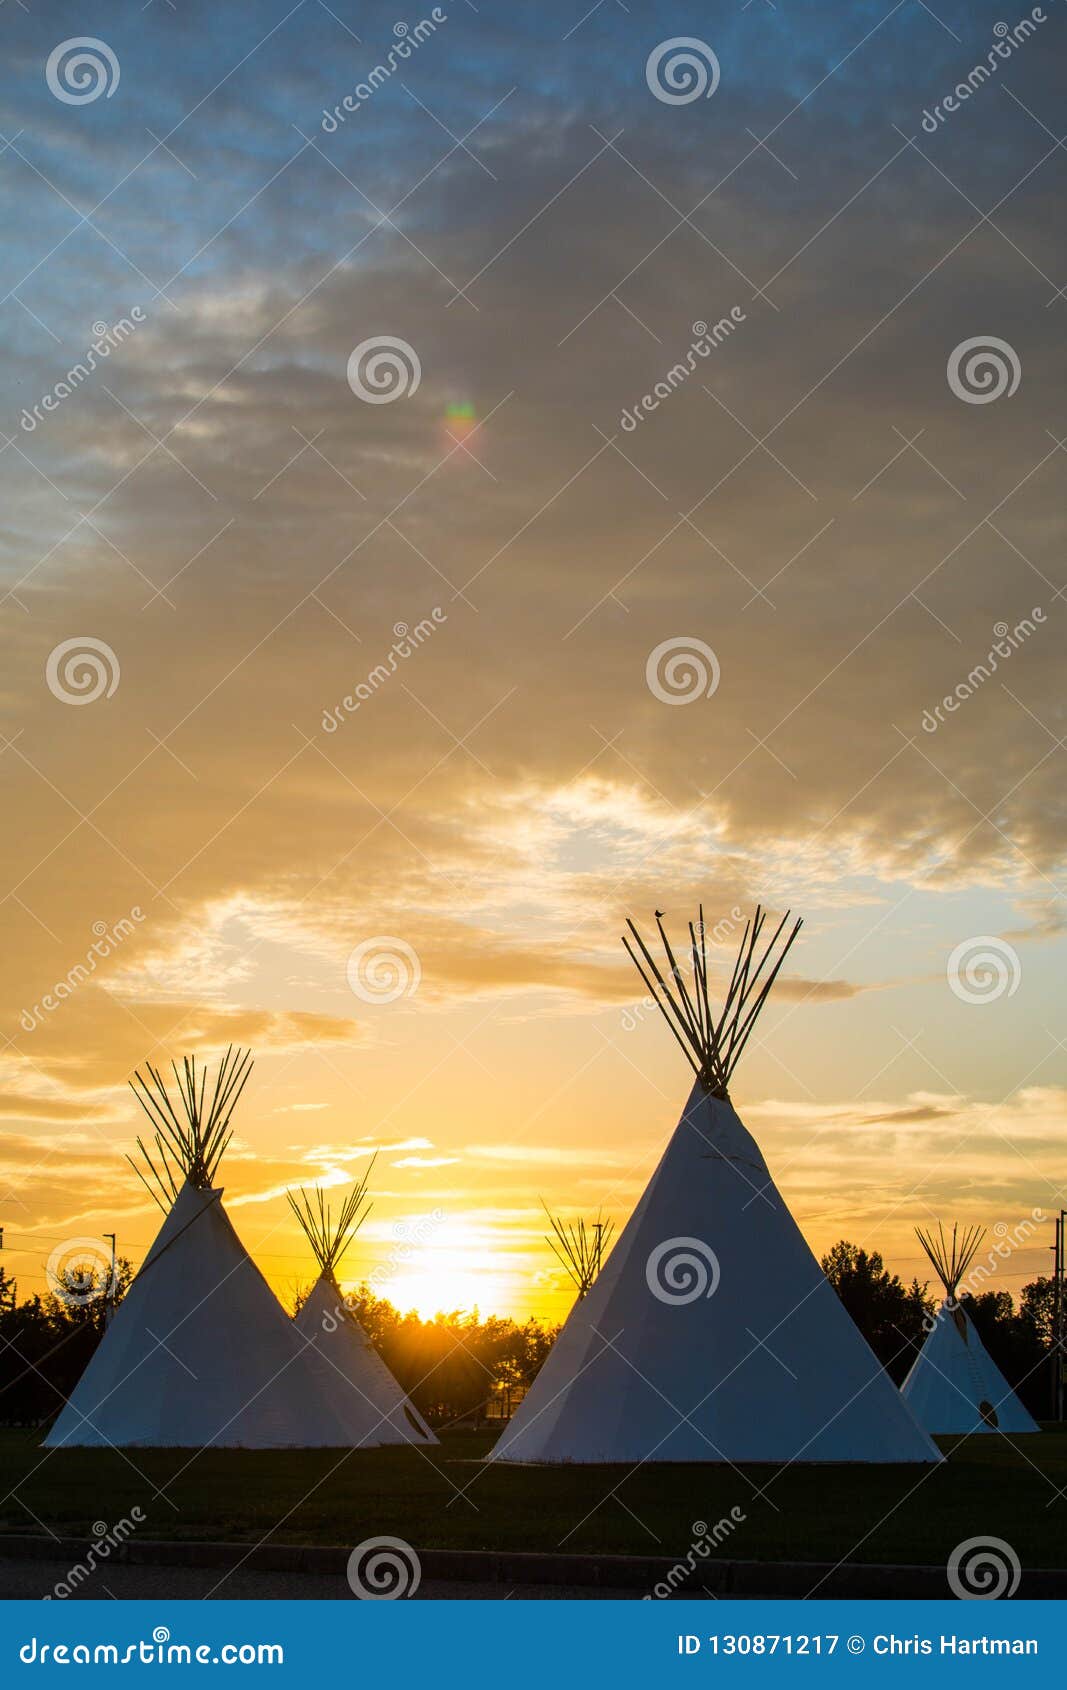 native american tepees on the prairies at sunset